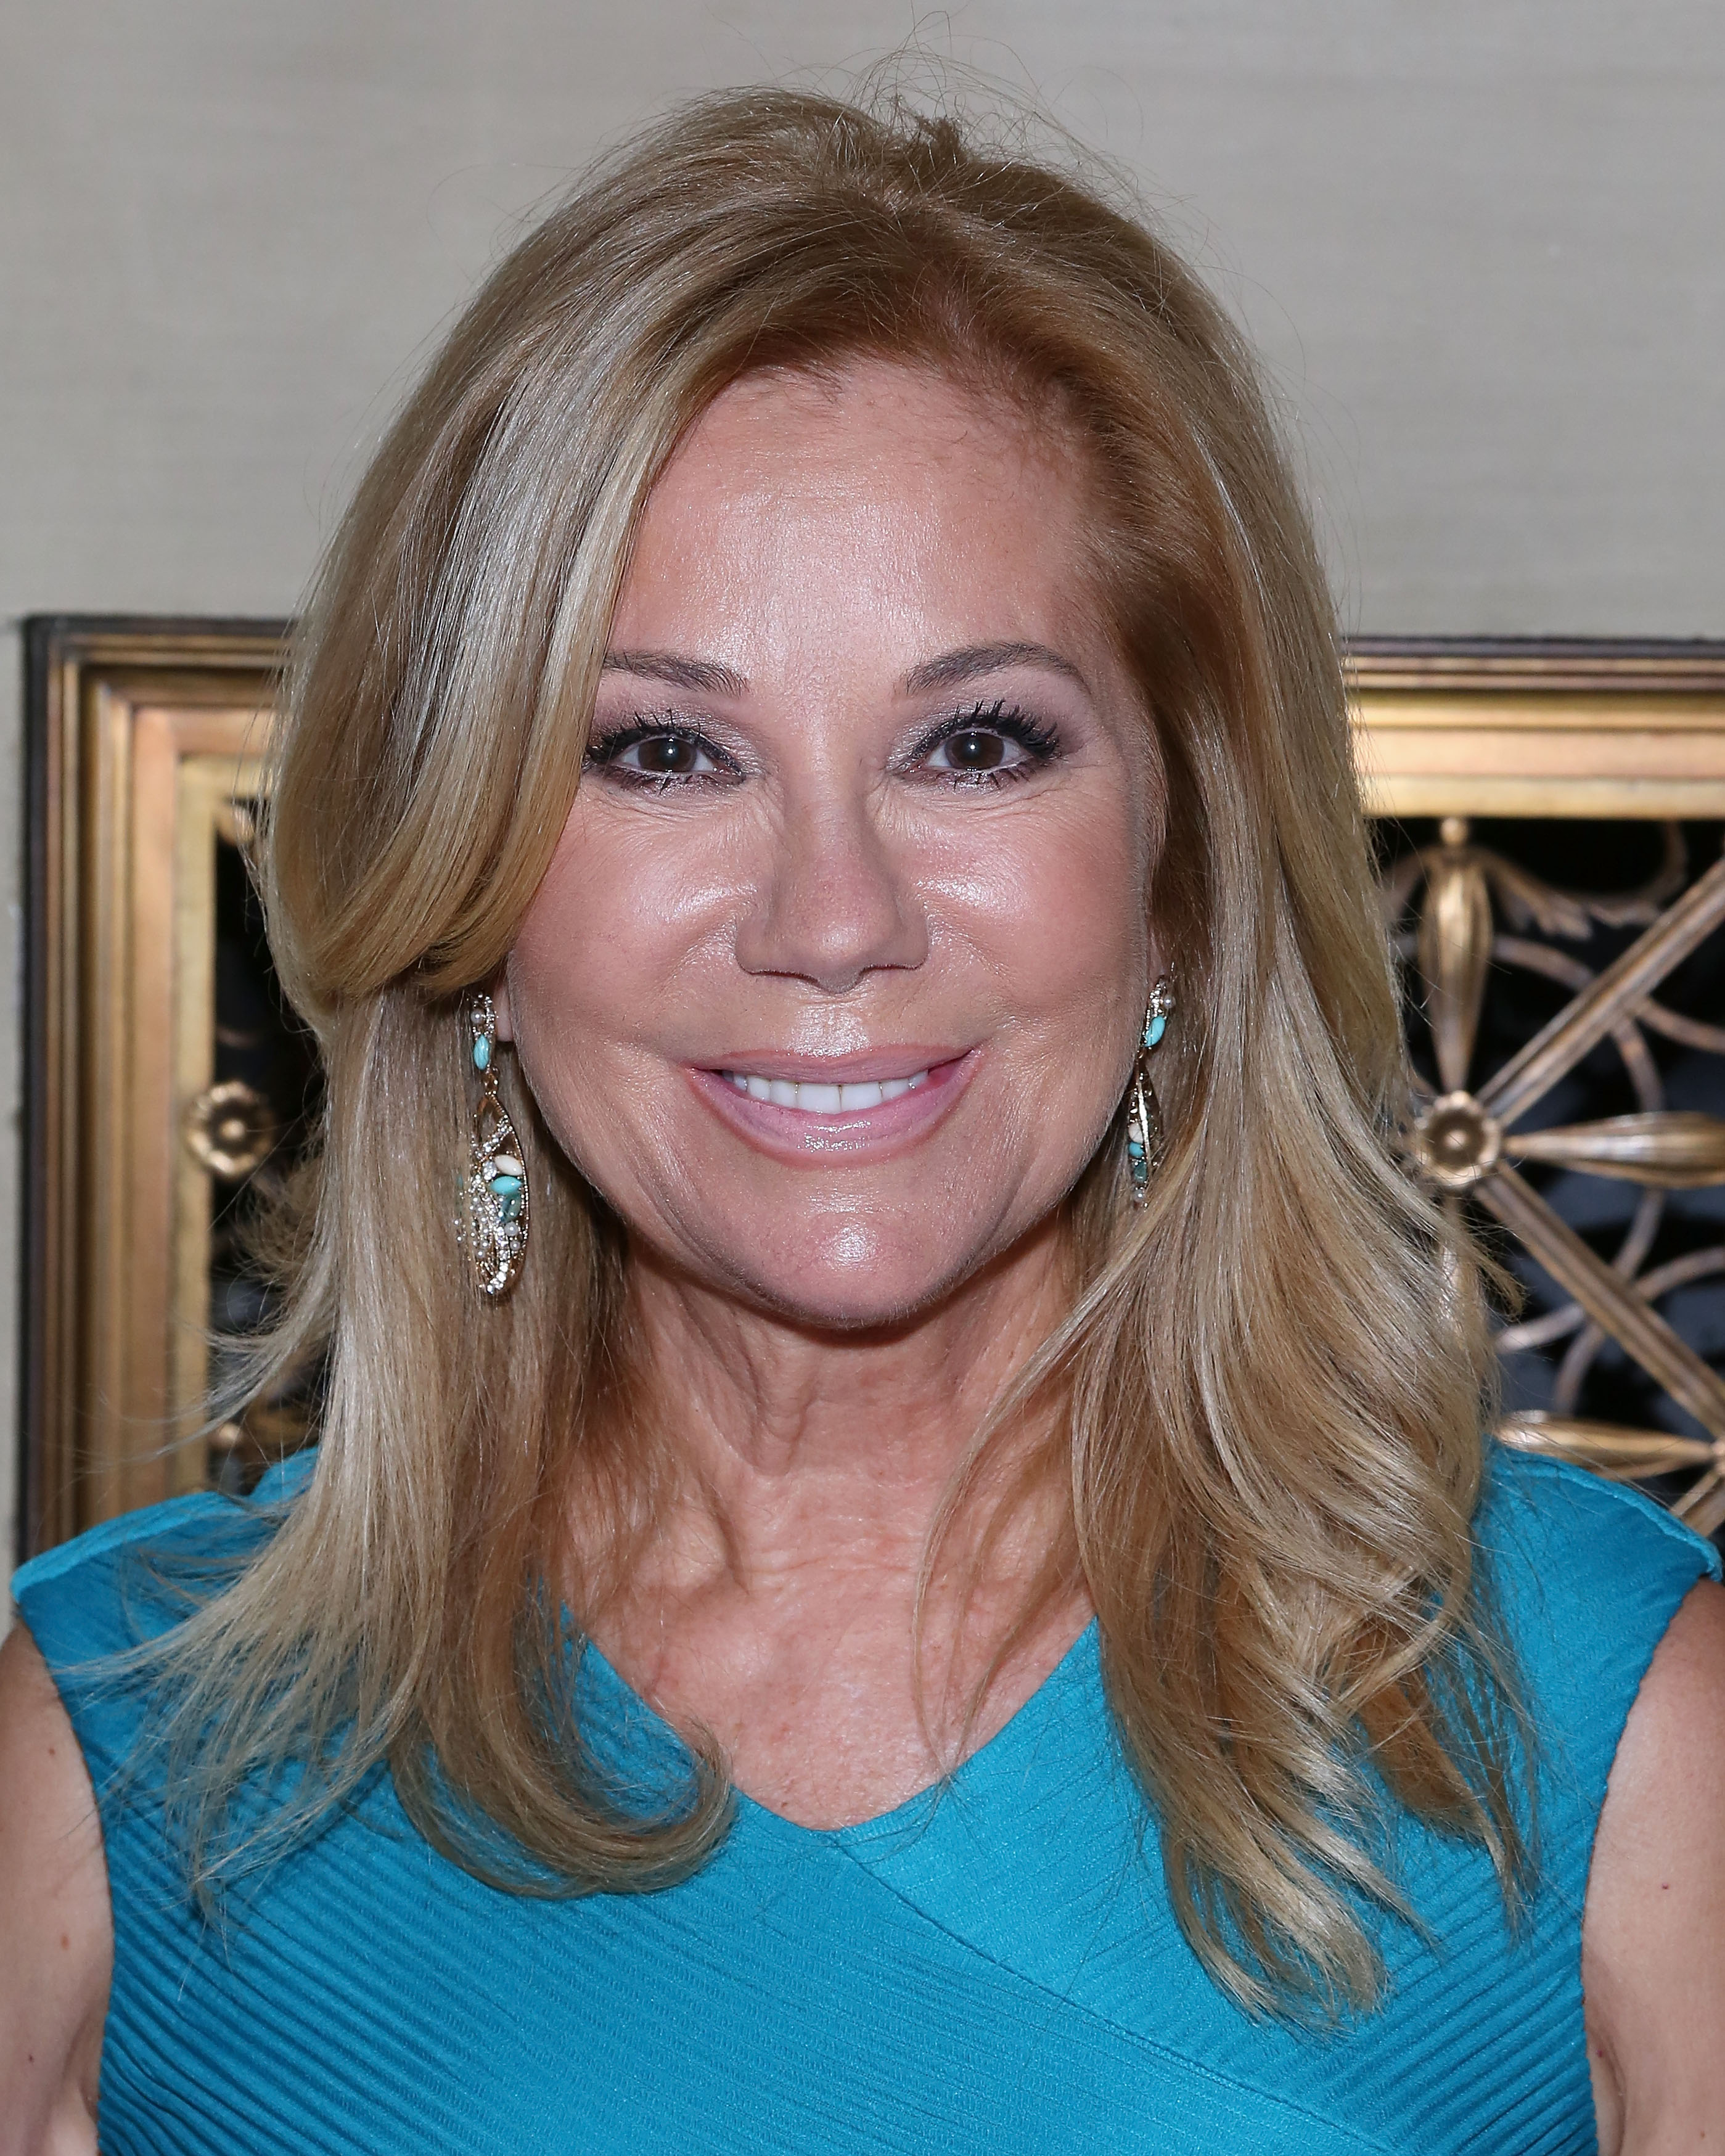 Top 101+ Images pictures of kathie lee gifford Completed